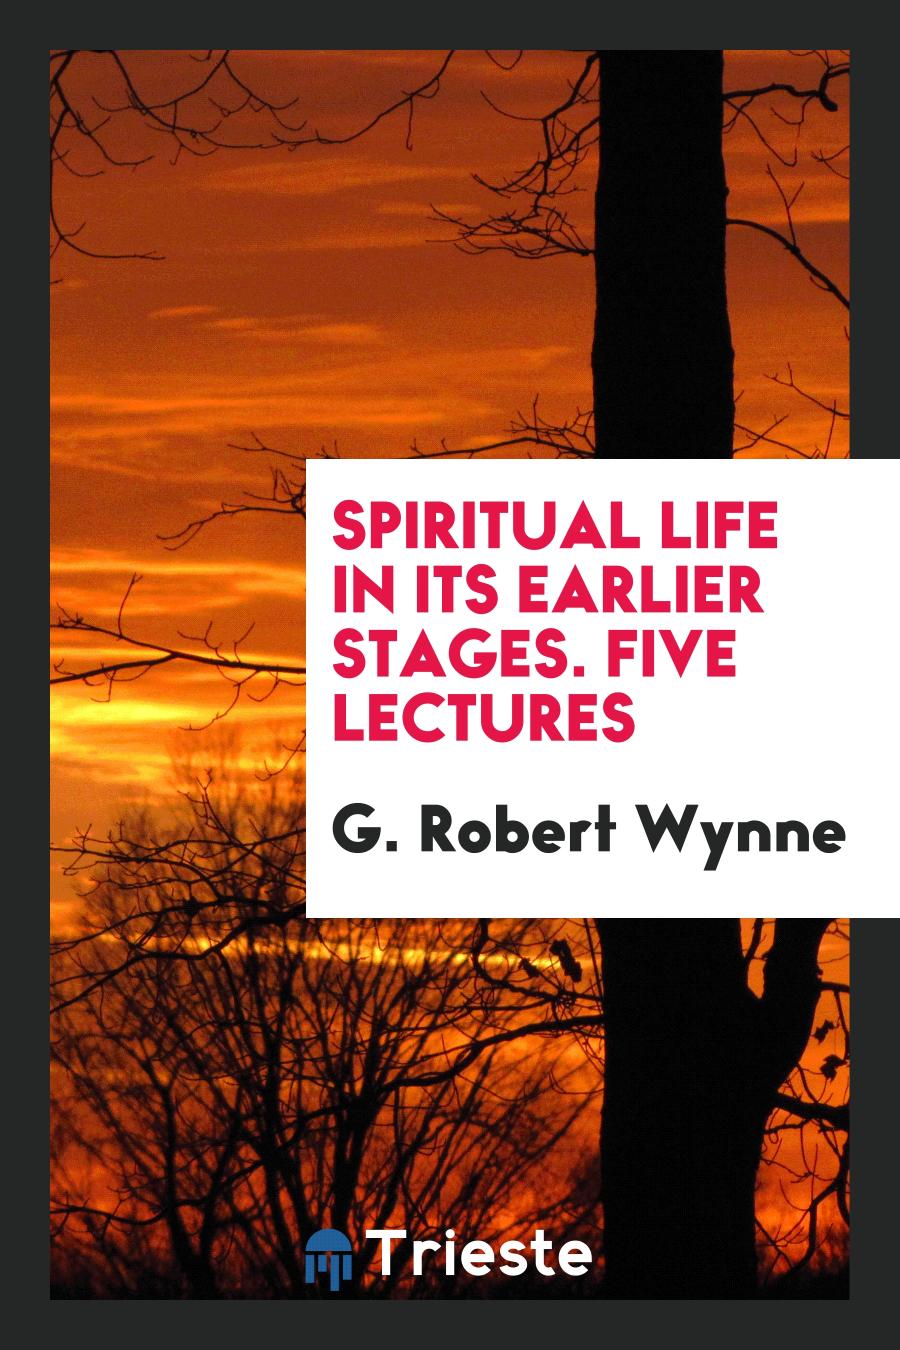 Spiritual life in its earlier stages. Five lectures